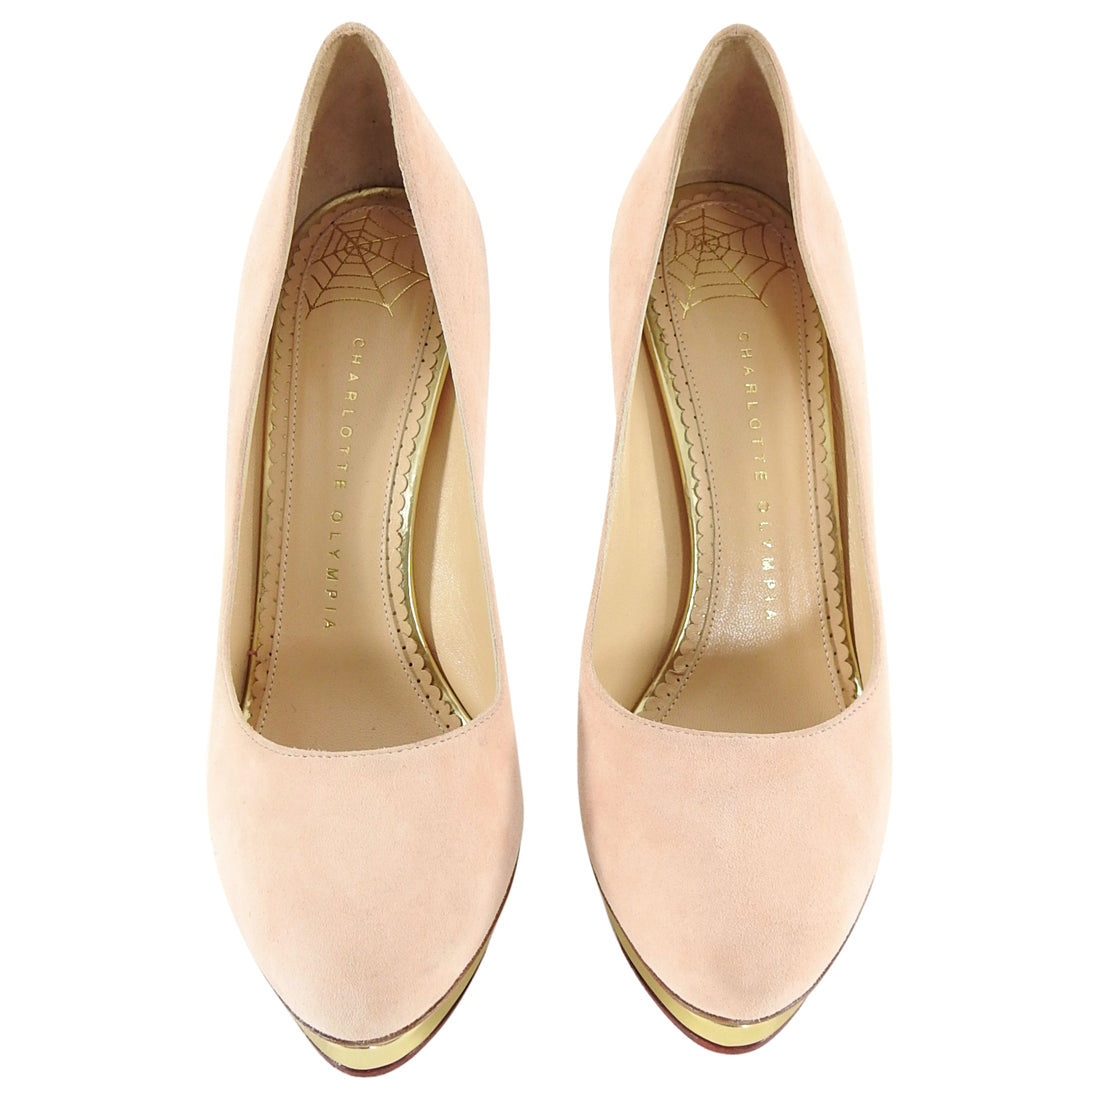 Charlotte Olympia Nude Suede Gold Platform Pumps - 8.5